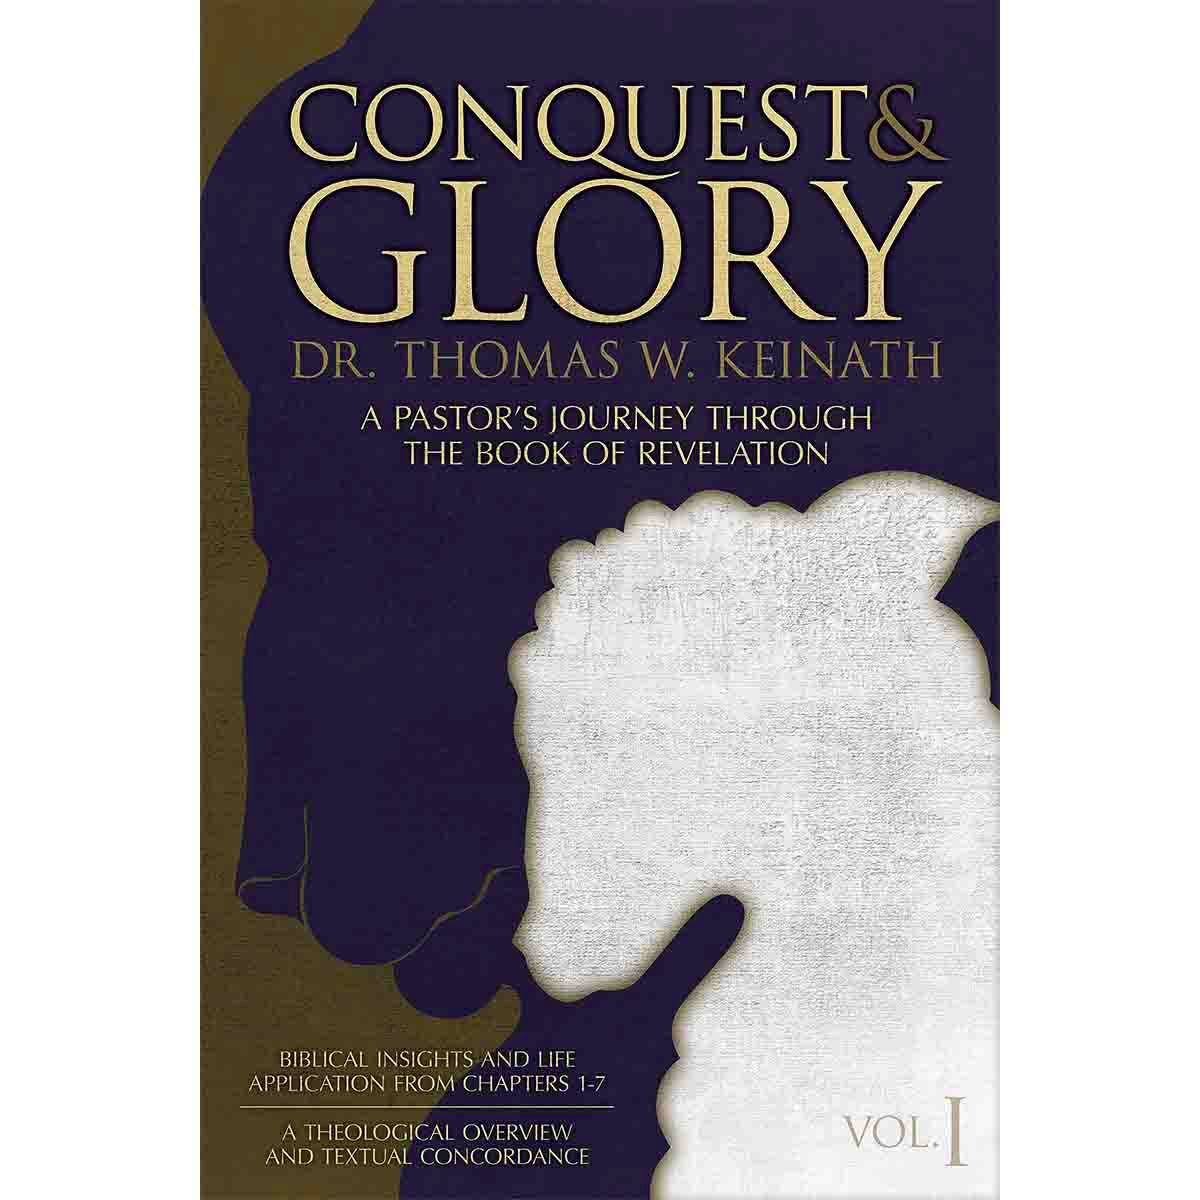 Conquest and Glory: A Pastor's Journey Through the Book of Revelation